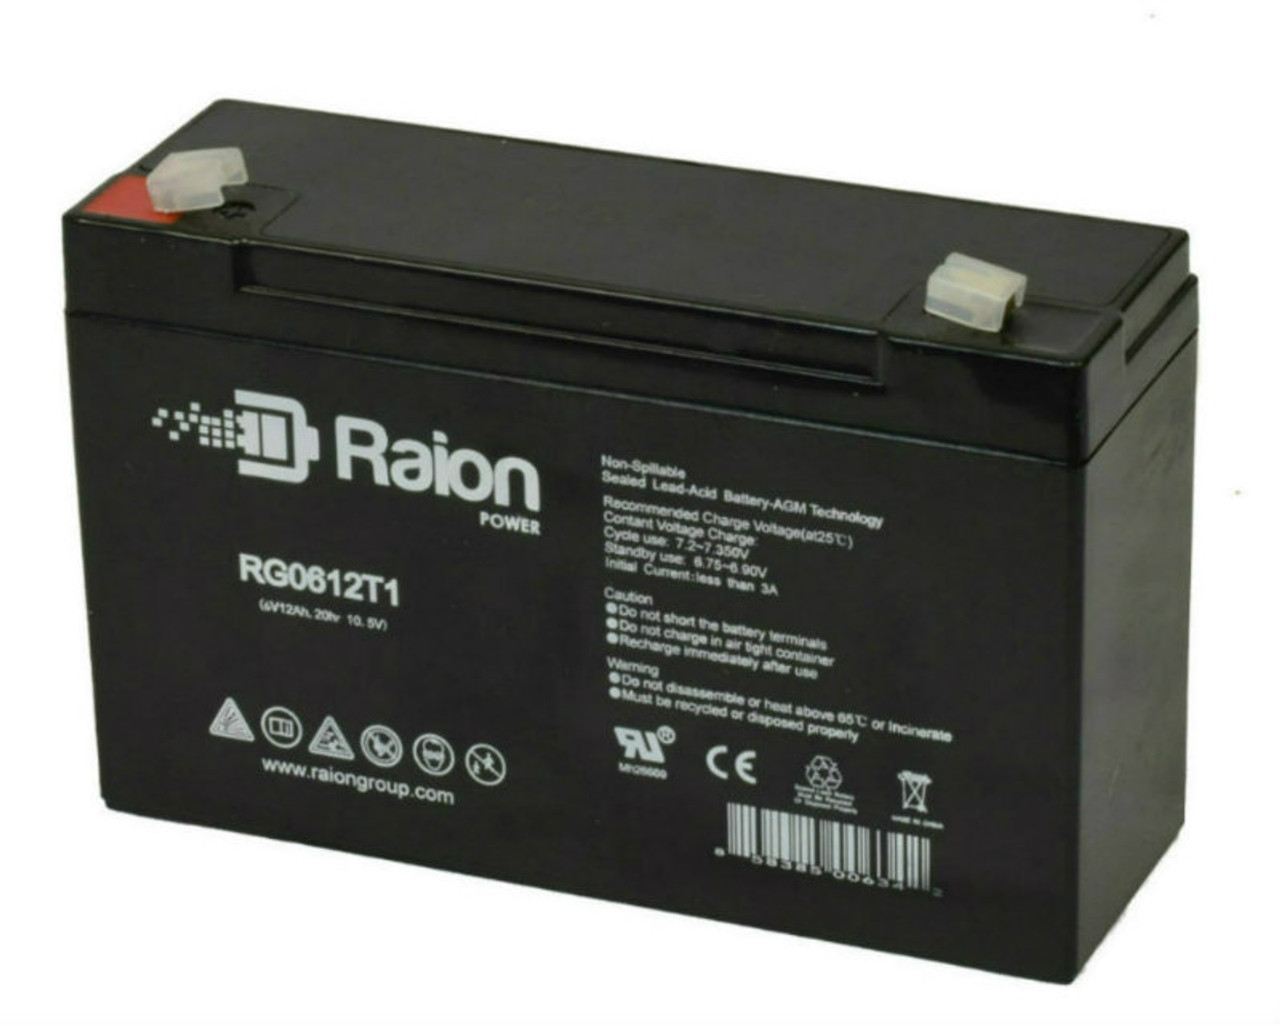 Raion Power RG06120T1 Replacement Battery for Power Energy HR6-64W